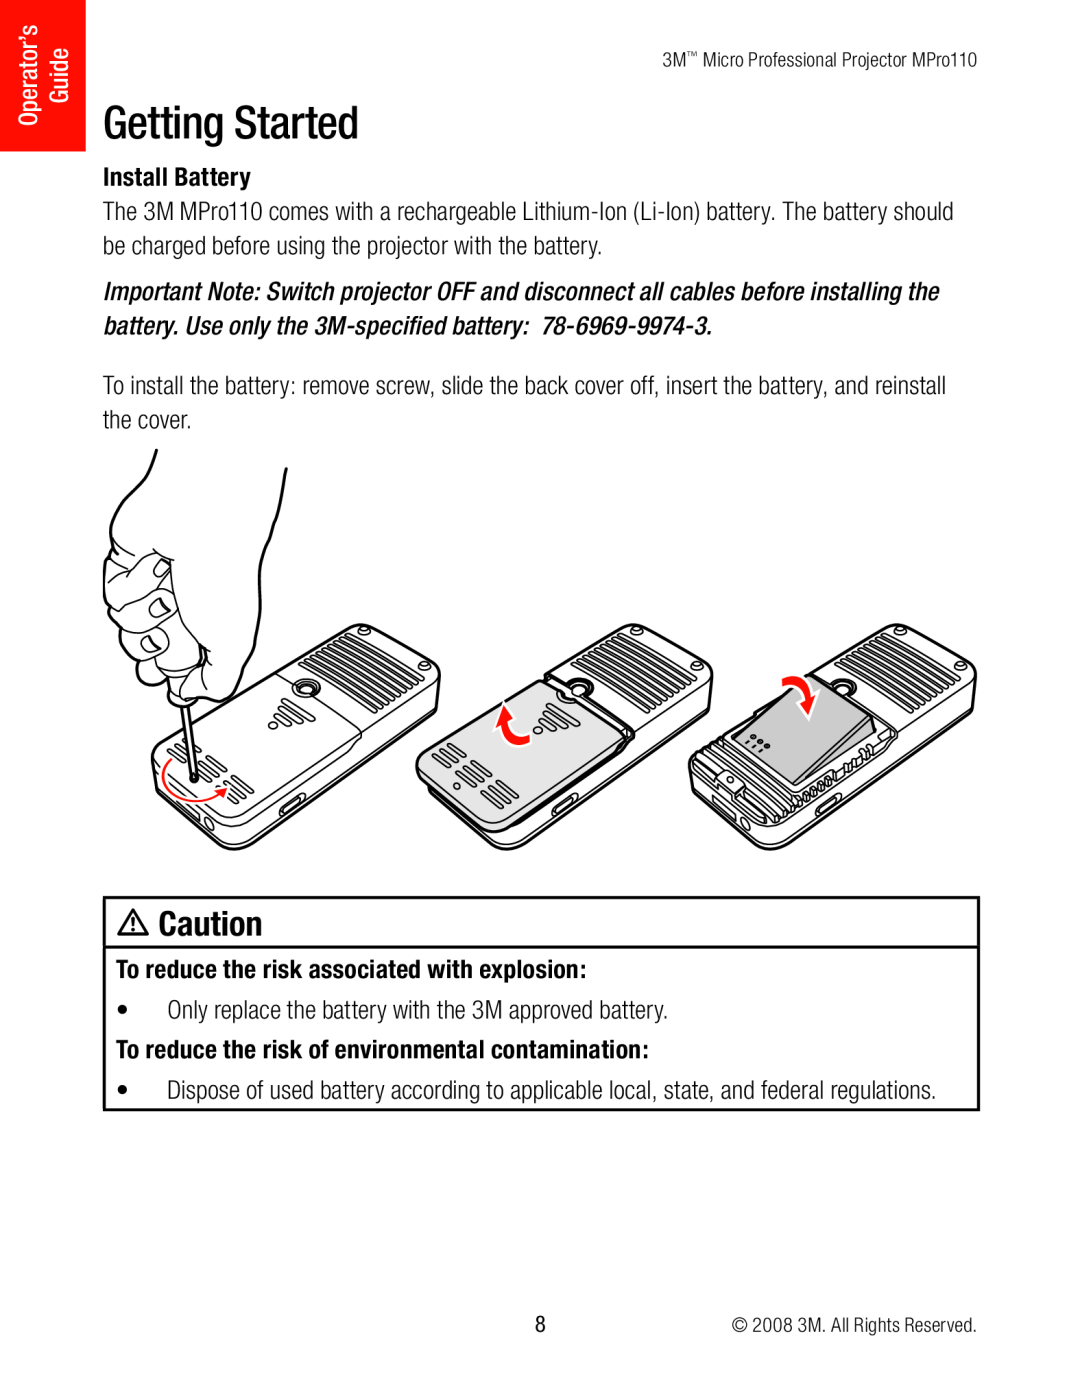 3M MPro110 manual Getting Started, Install Battery, battery. Use only the 3M-specified battery, m Caution 